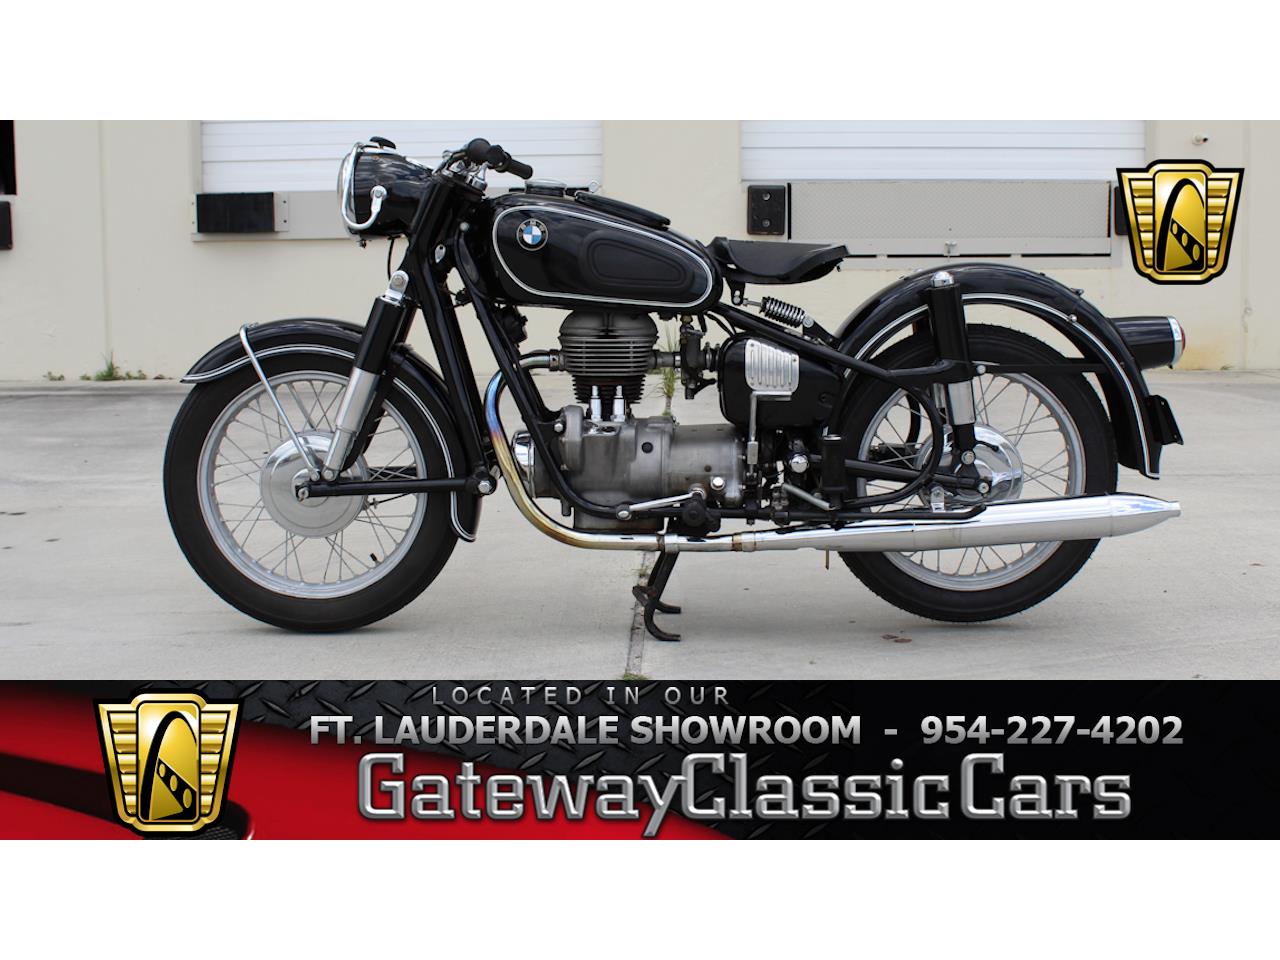 vintage bmw motorcycles for sale near me